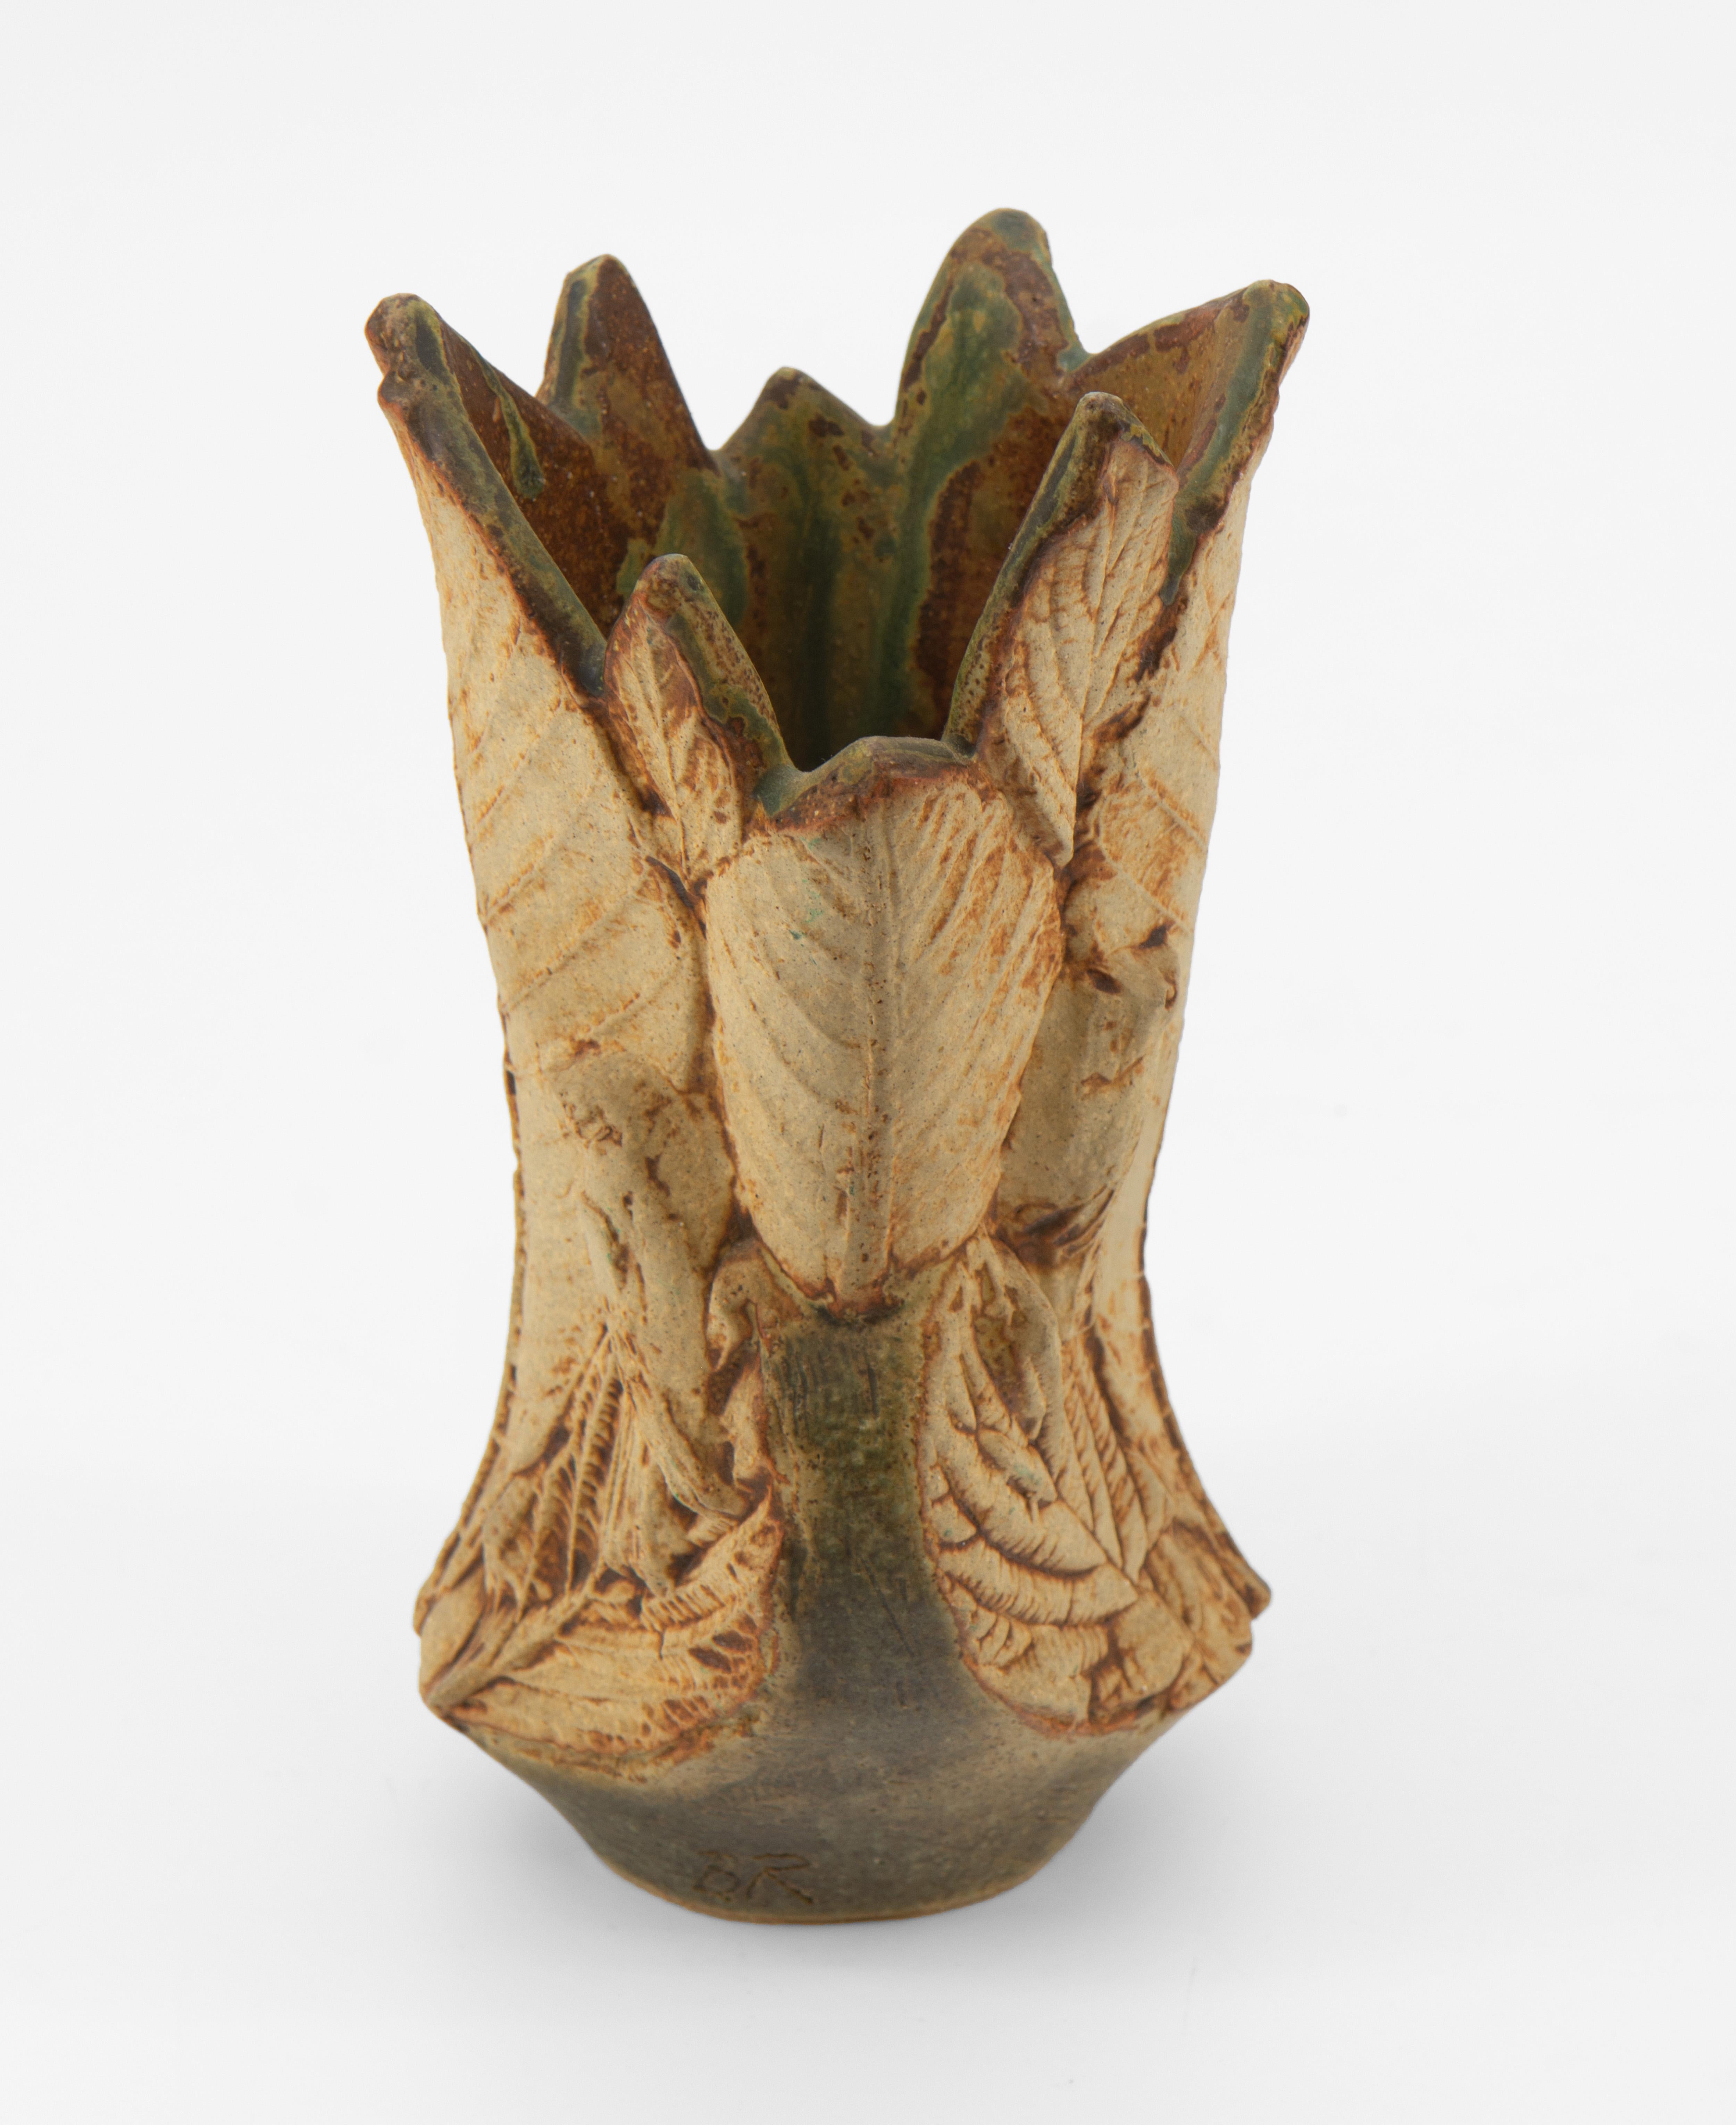 British studio pottery small vase by Bernard Rooke. Featuring leaves and bird decoration. Inscribed BR. Circa 1970.

In very good condition, with no damage. 

Bernard Rooke studied painting and lithography at Ipswich School of Art between 1955 and